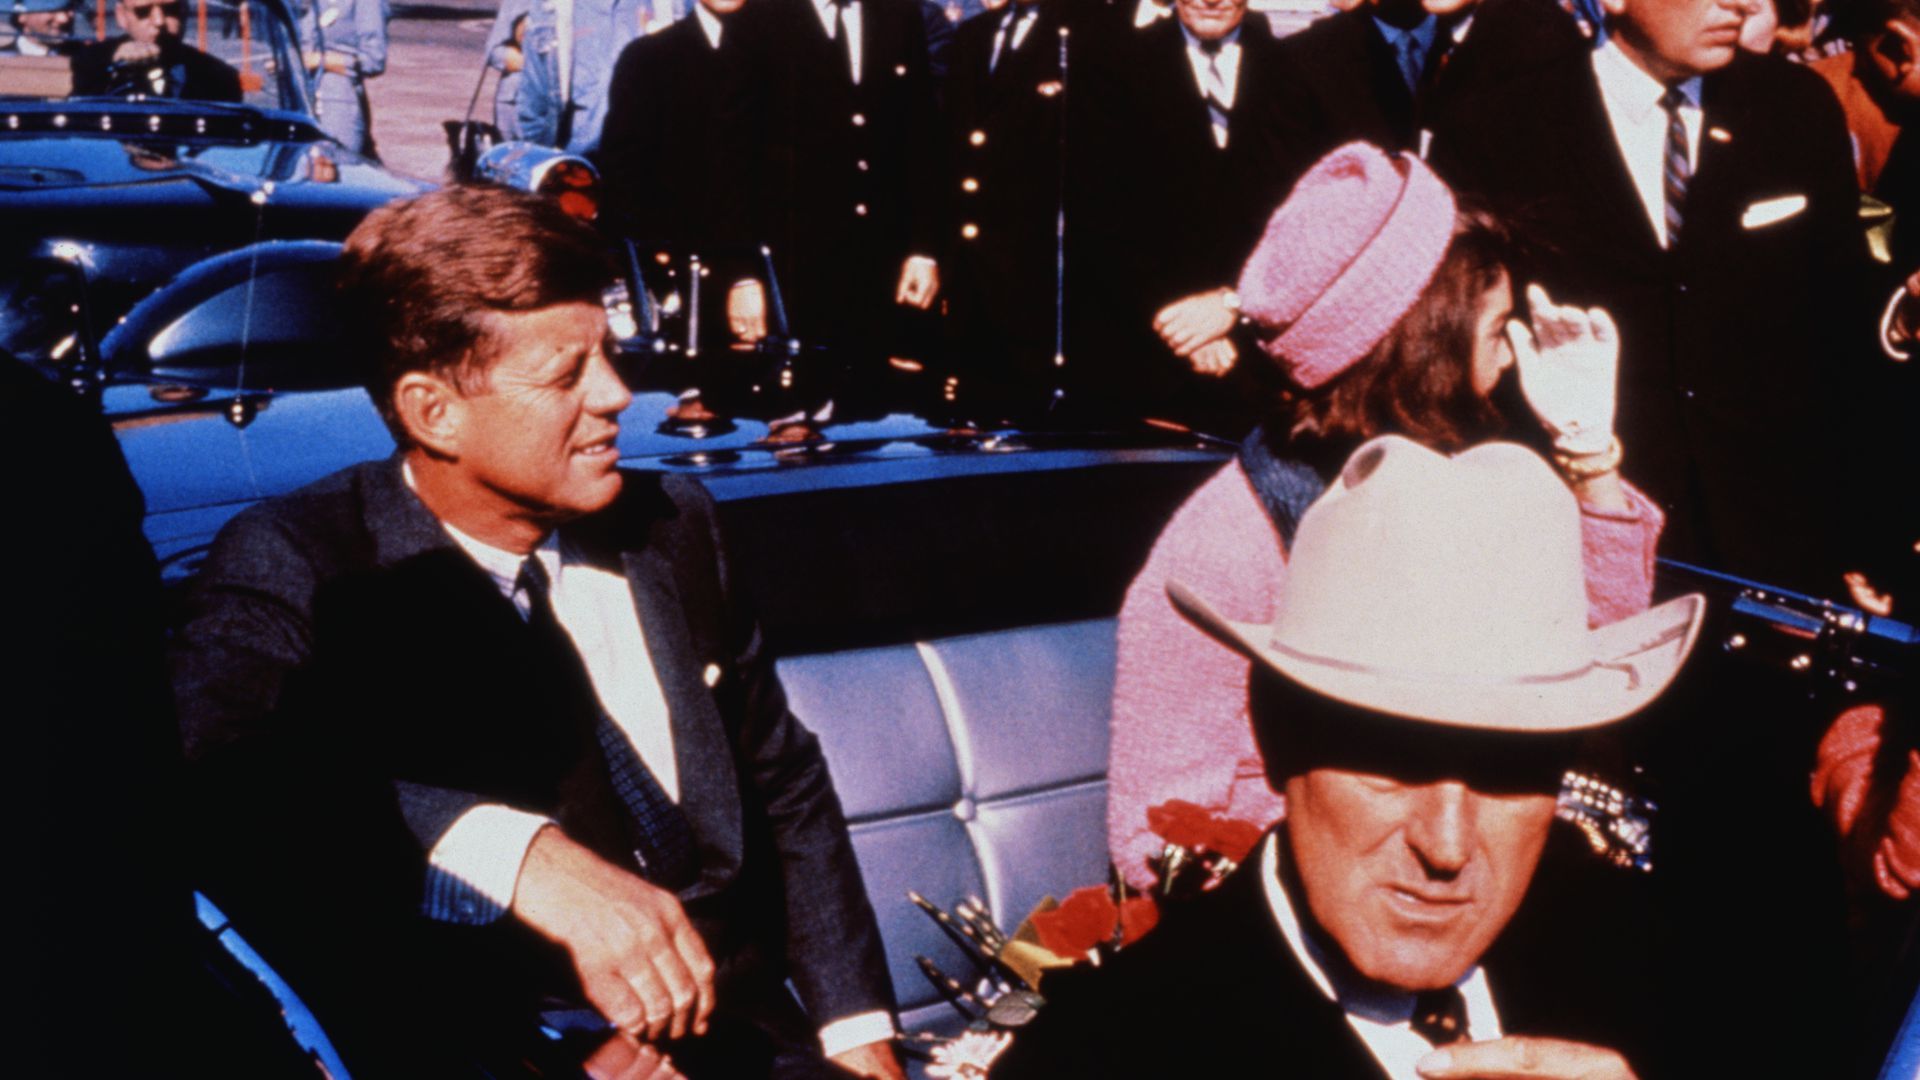 President Kennedy and Mrs. Kennedy settled in rear seats. Photo: Getty Images